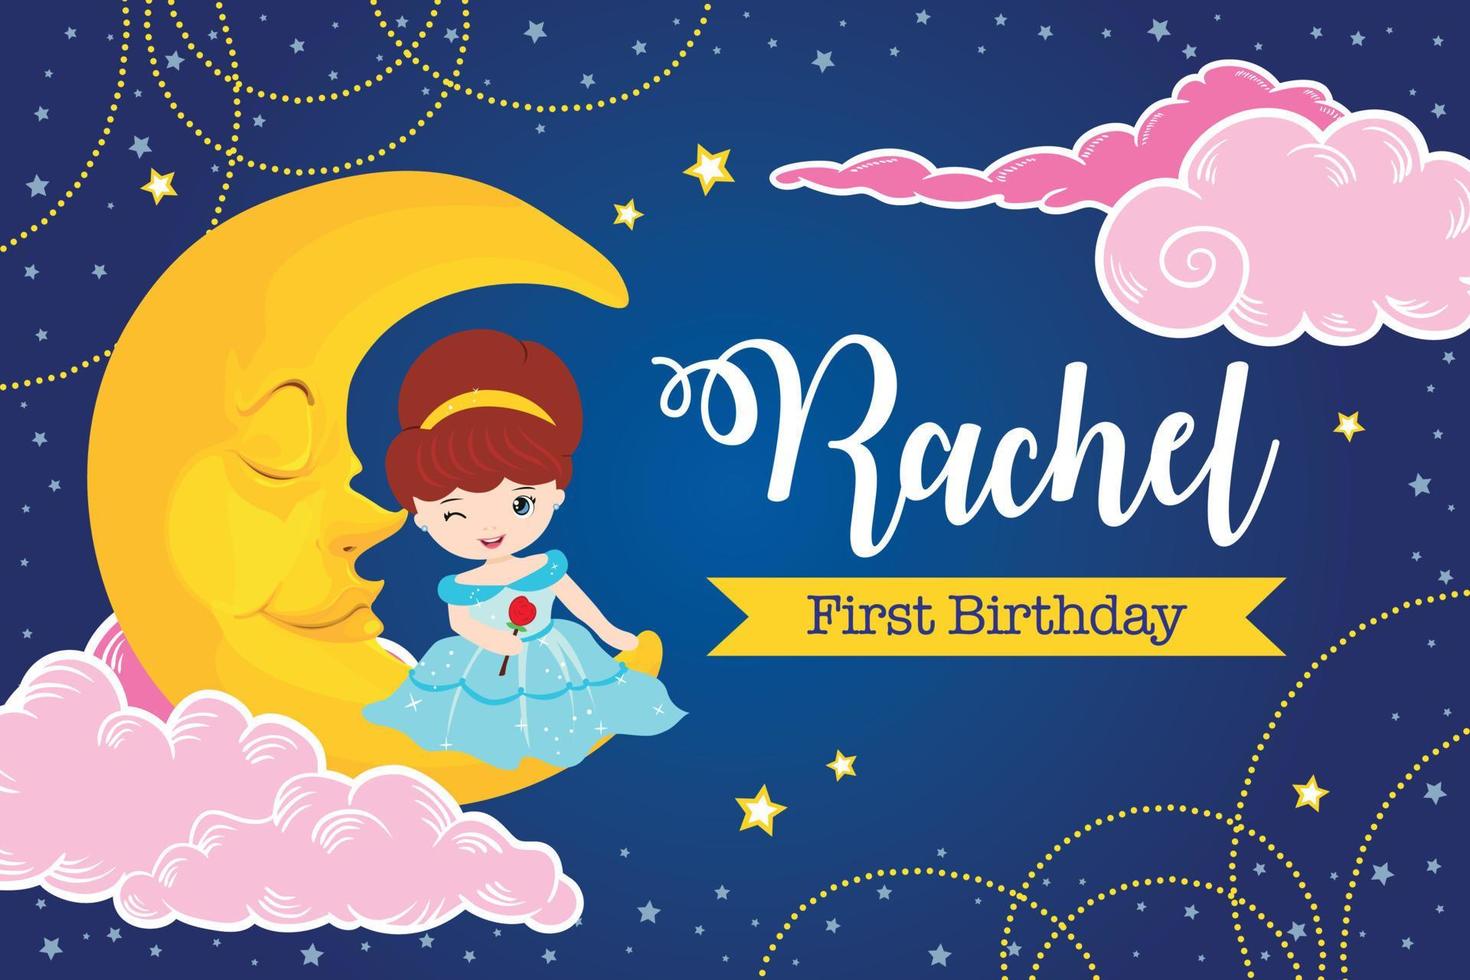 Twinkle twinkle little star with cute princess on the moon for birthday or baby shower party backdrop template vector